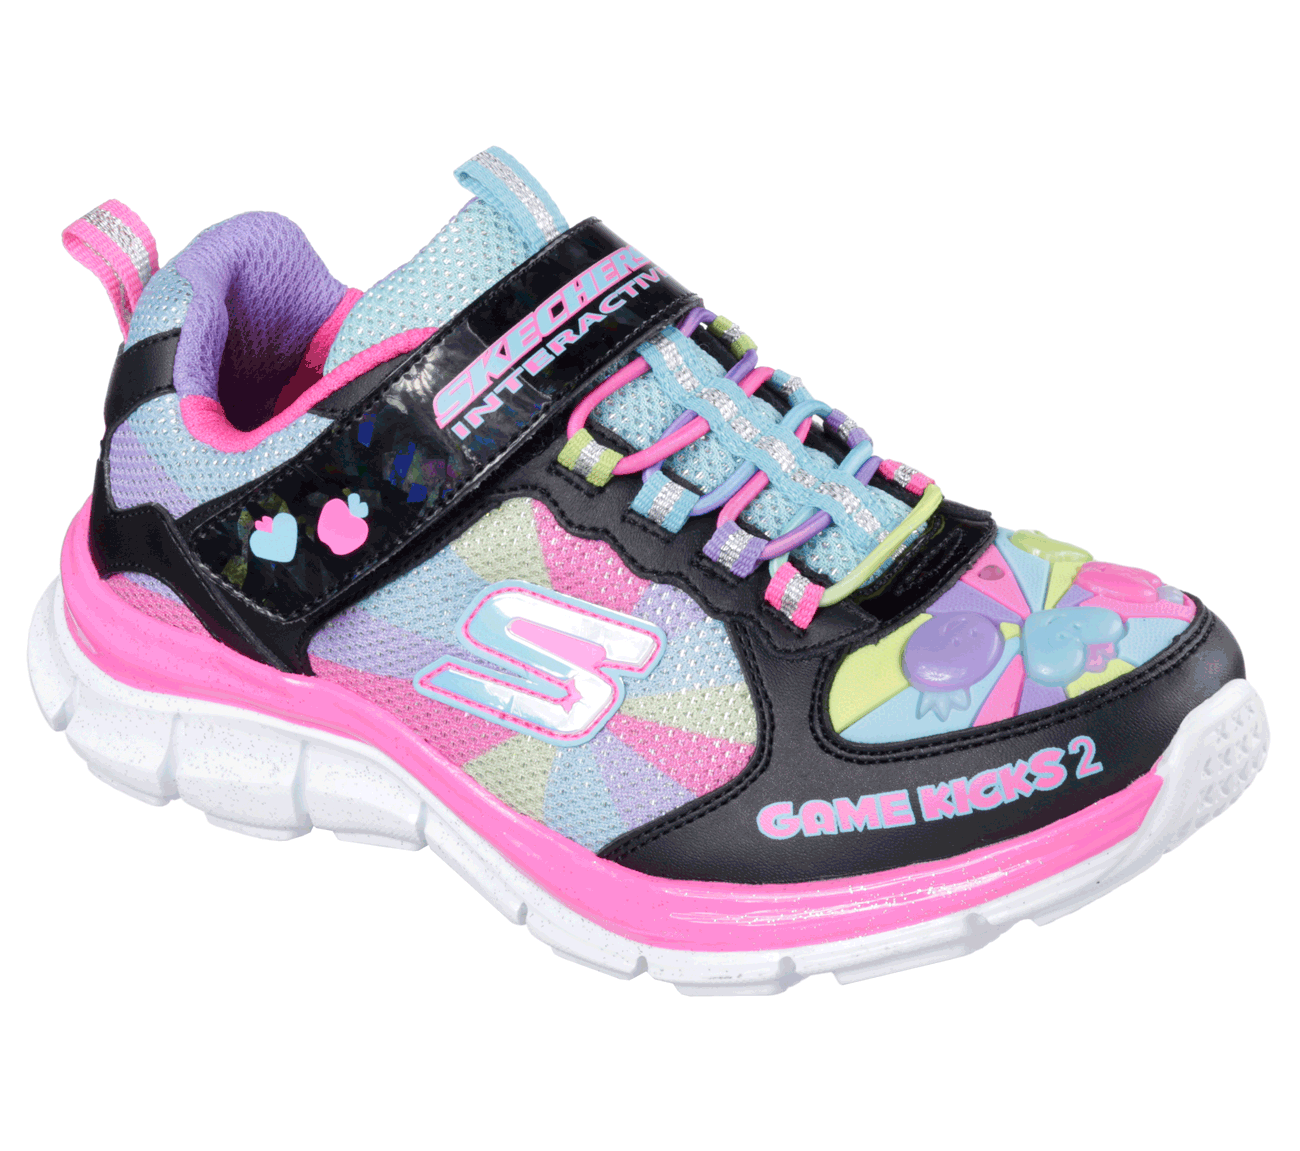 skechers shoe with game